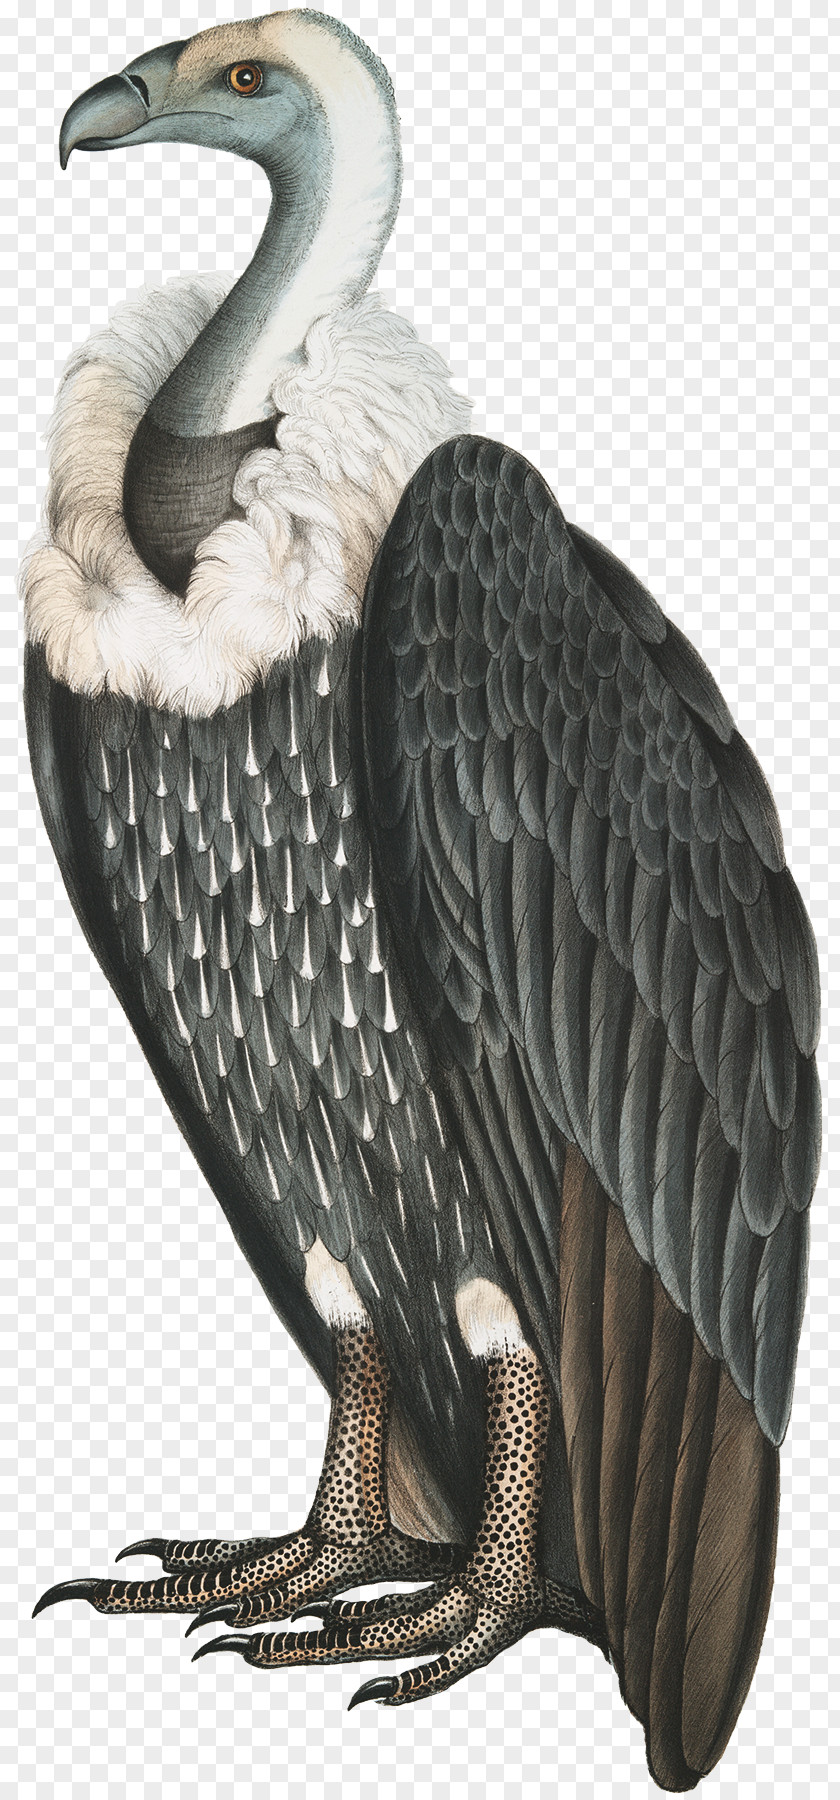 Naturalist Stock Photography Illustration Vulture Image PNG